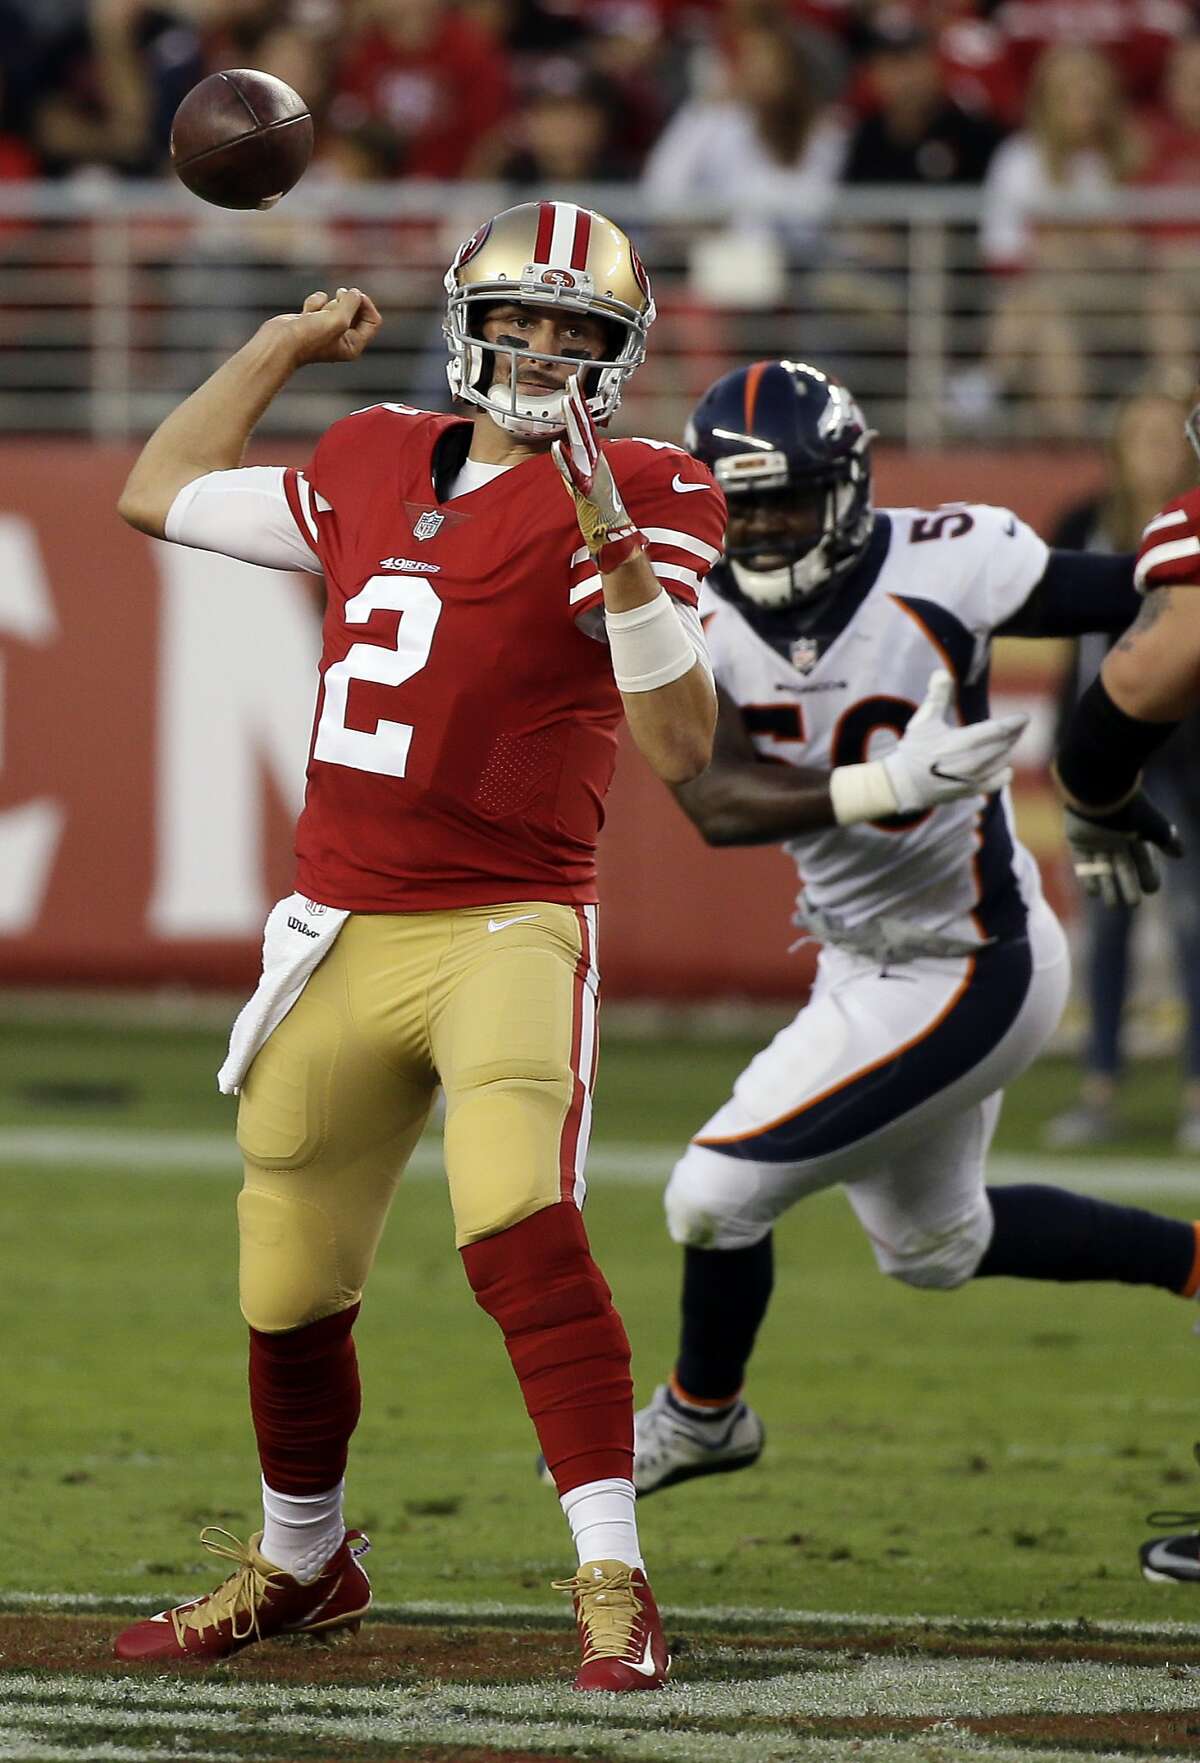 San Francisco 49ers quarterback Brian Hoyer (2) looses his grip on the ball and fumbles while trying to pass during the first half of a preseason NFL football game against the Denver Broncos Saturday, Aug. 19, 2017, in Santa Clara, Calif. (AP Photo/Eric Risberg)